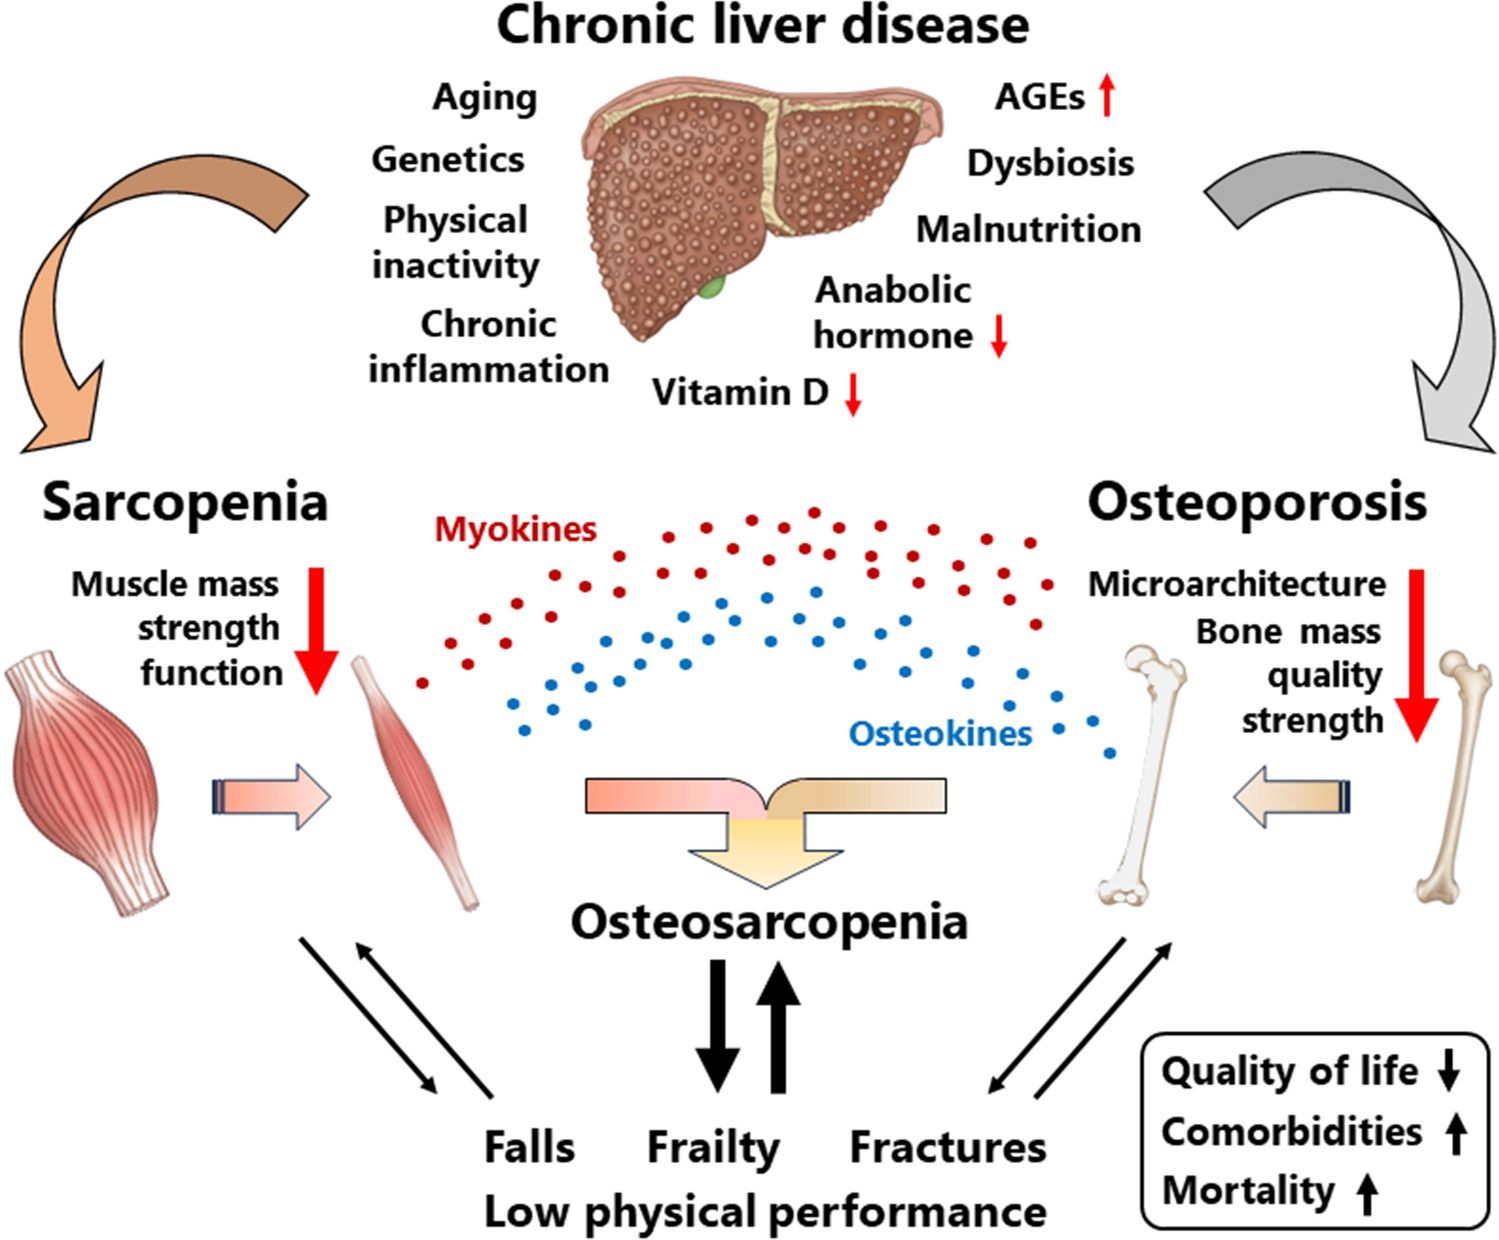 Association of chronic liver disease with bone diseases and muscle weakness